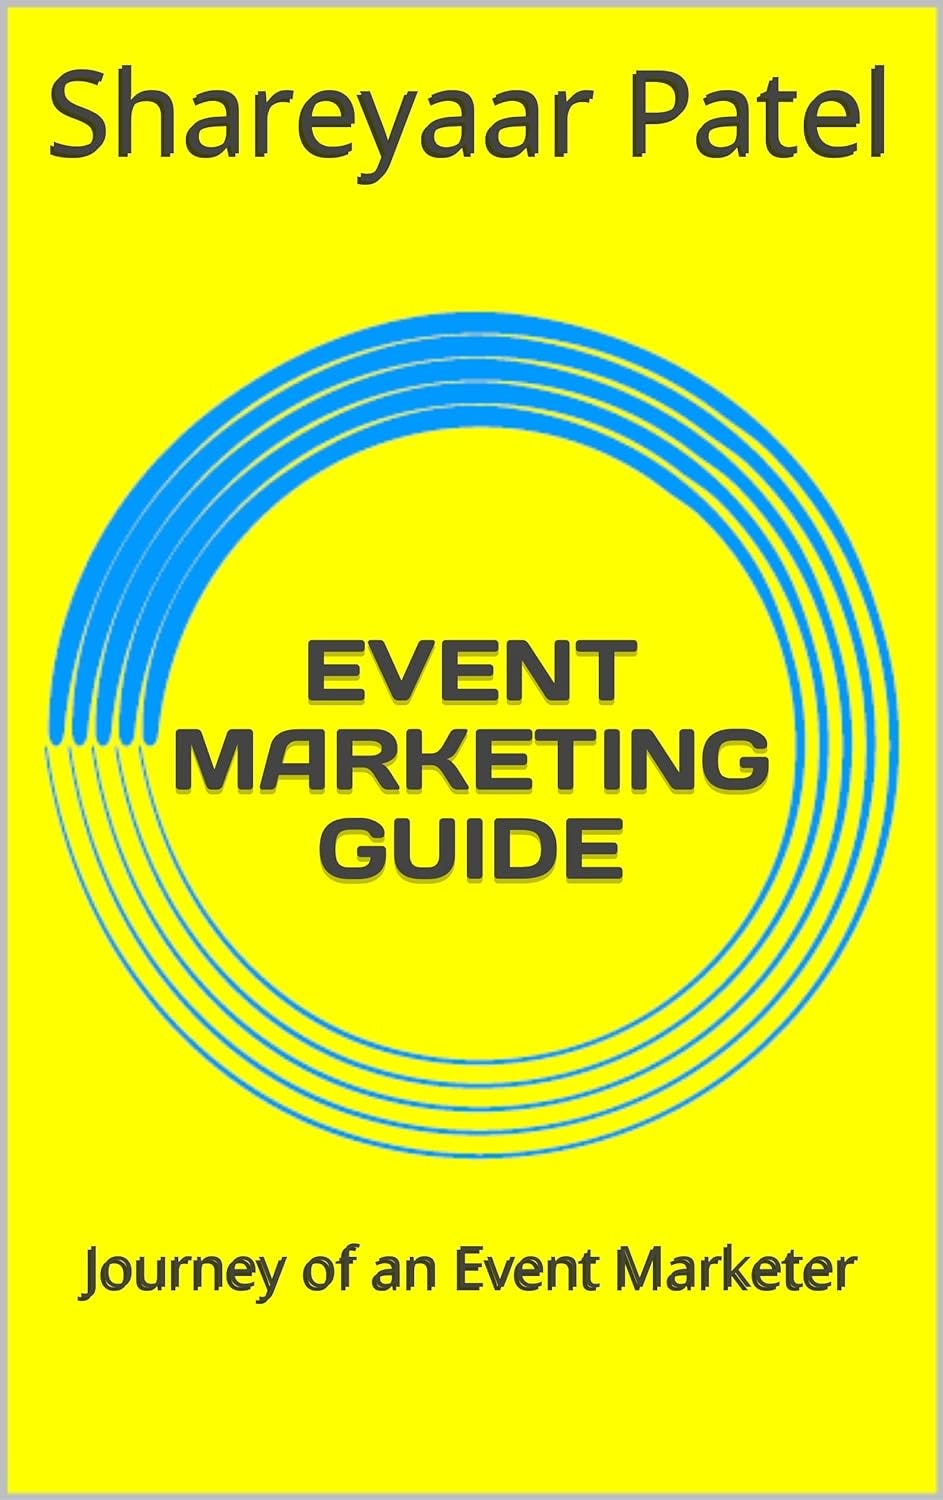 EVENT MARKETING GUIDE: Journey of an Event Marketer